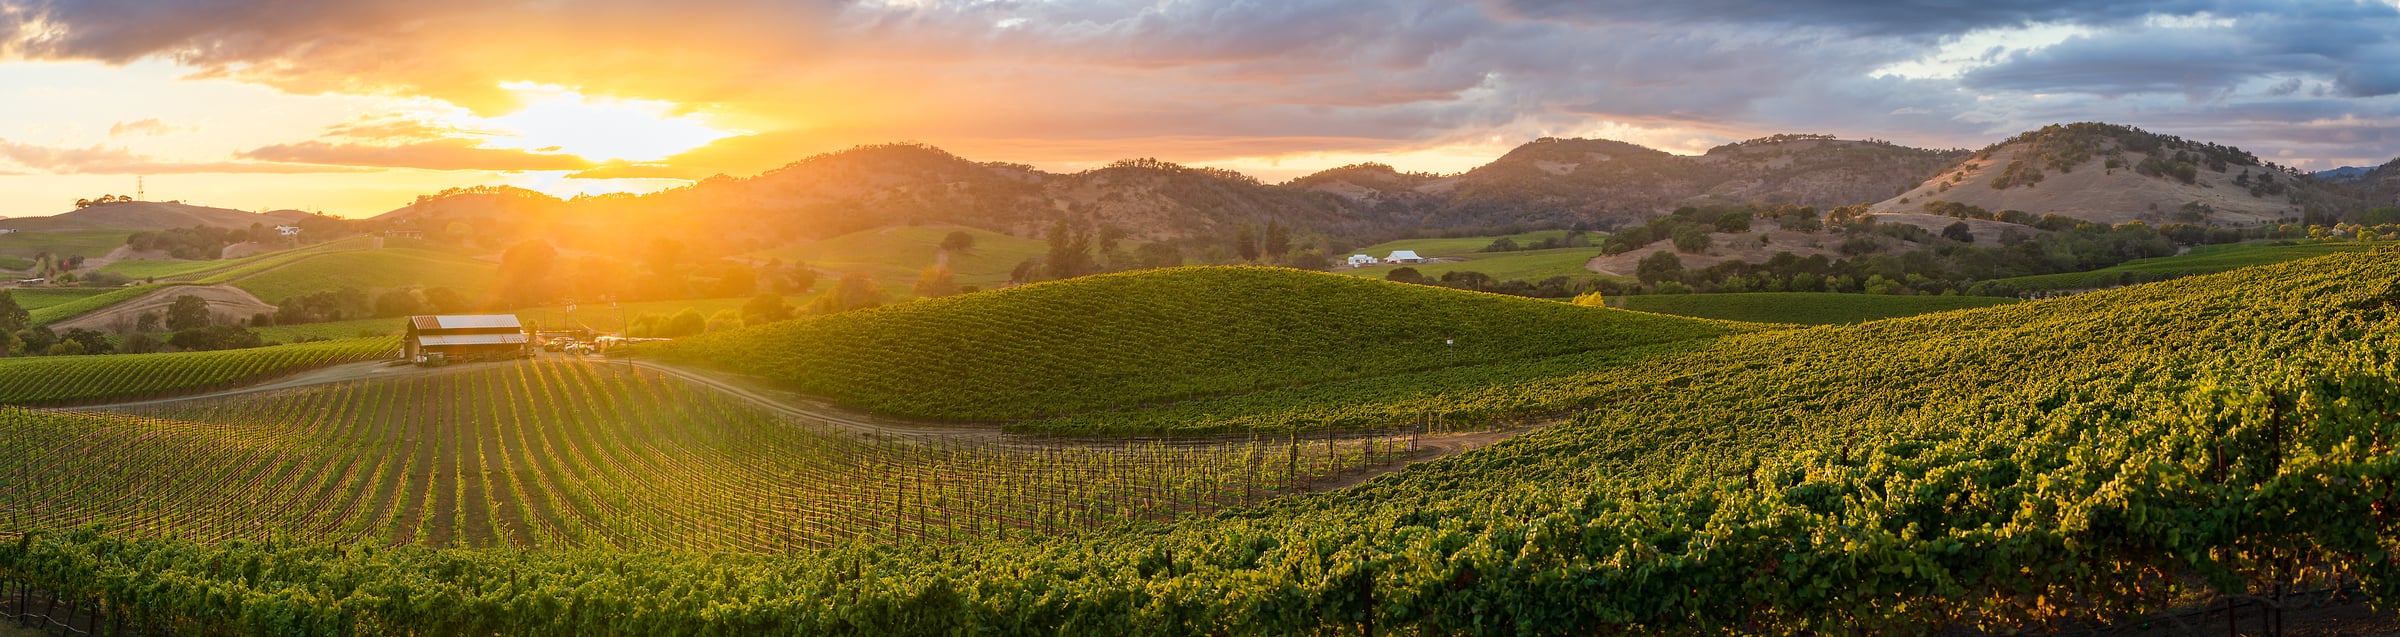 334 megapixels! A very high resolution, large-format VAST photo print of a Napa vineyard at sunset; landscape photograph created by Jeff Lewis in Napa, California.